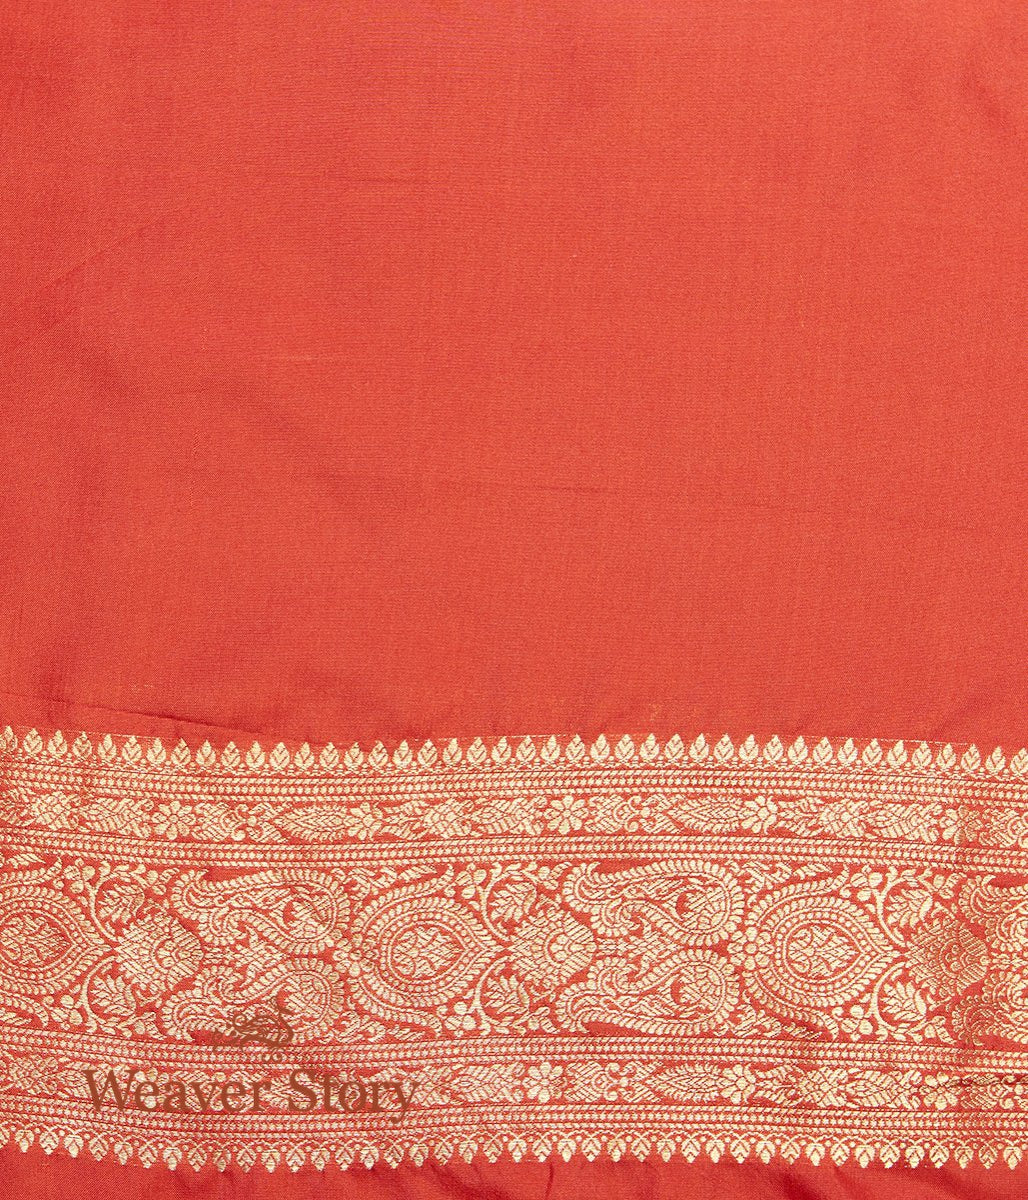 Handwoven_Red_Zari_Tanchoi_Saree_with_Small_Booti_WeaverStory_05